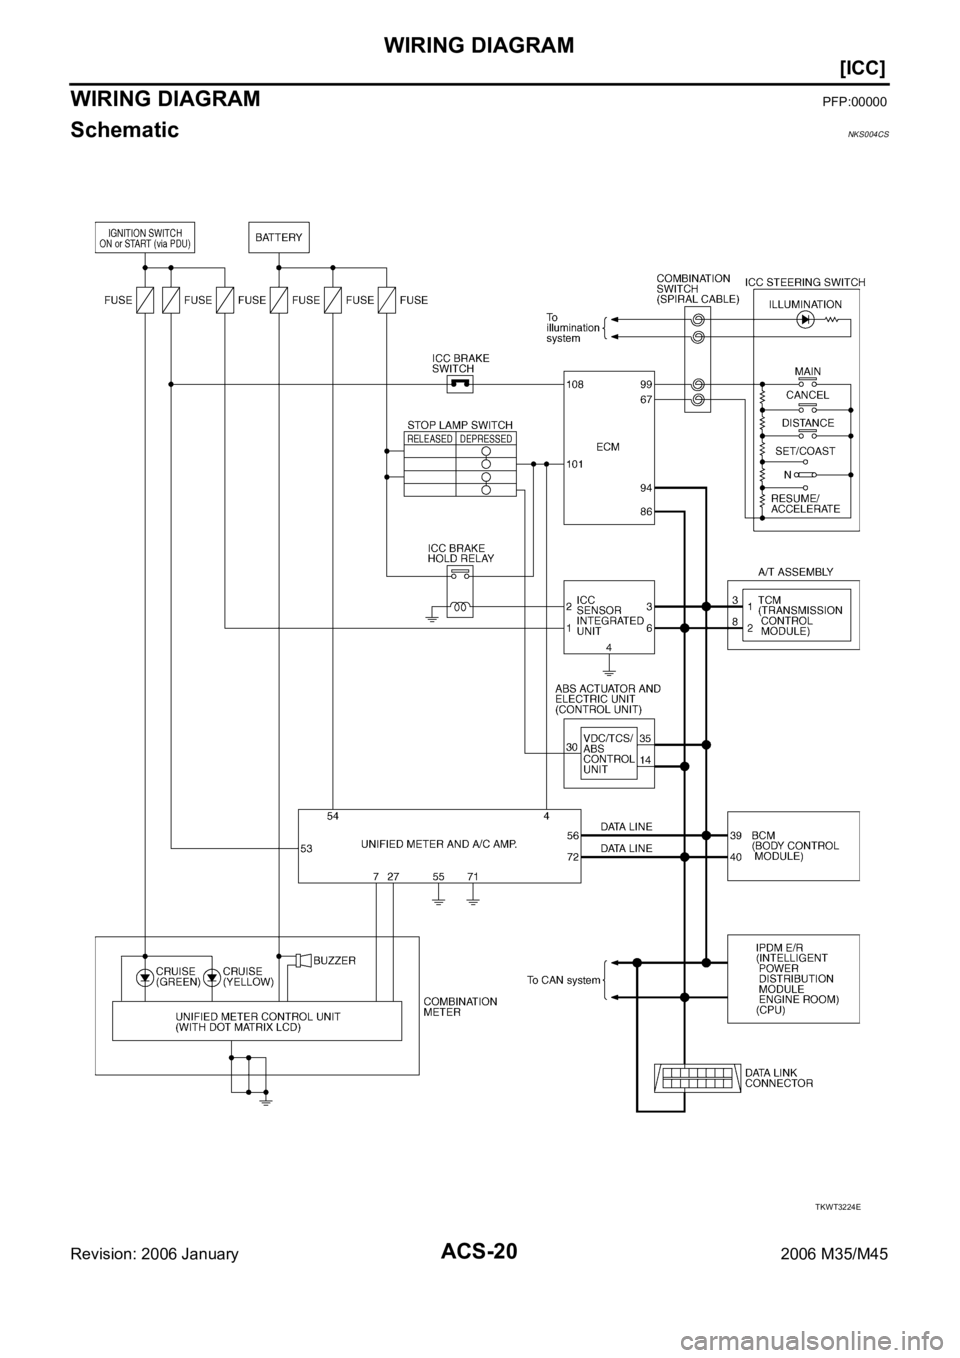 INFINITI M35 2006  Factory Owners Manual ACS-20
[ICC]
WIRING DIAGRAM
Revision: 2006 January2006 M35/M45
WIRING DIAGRAMPFP:00000
SchematicNKS004CS
TKWT3224E 